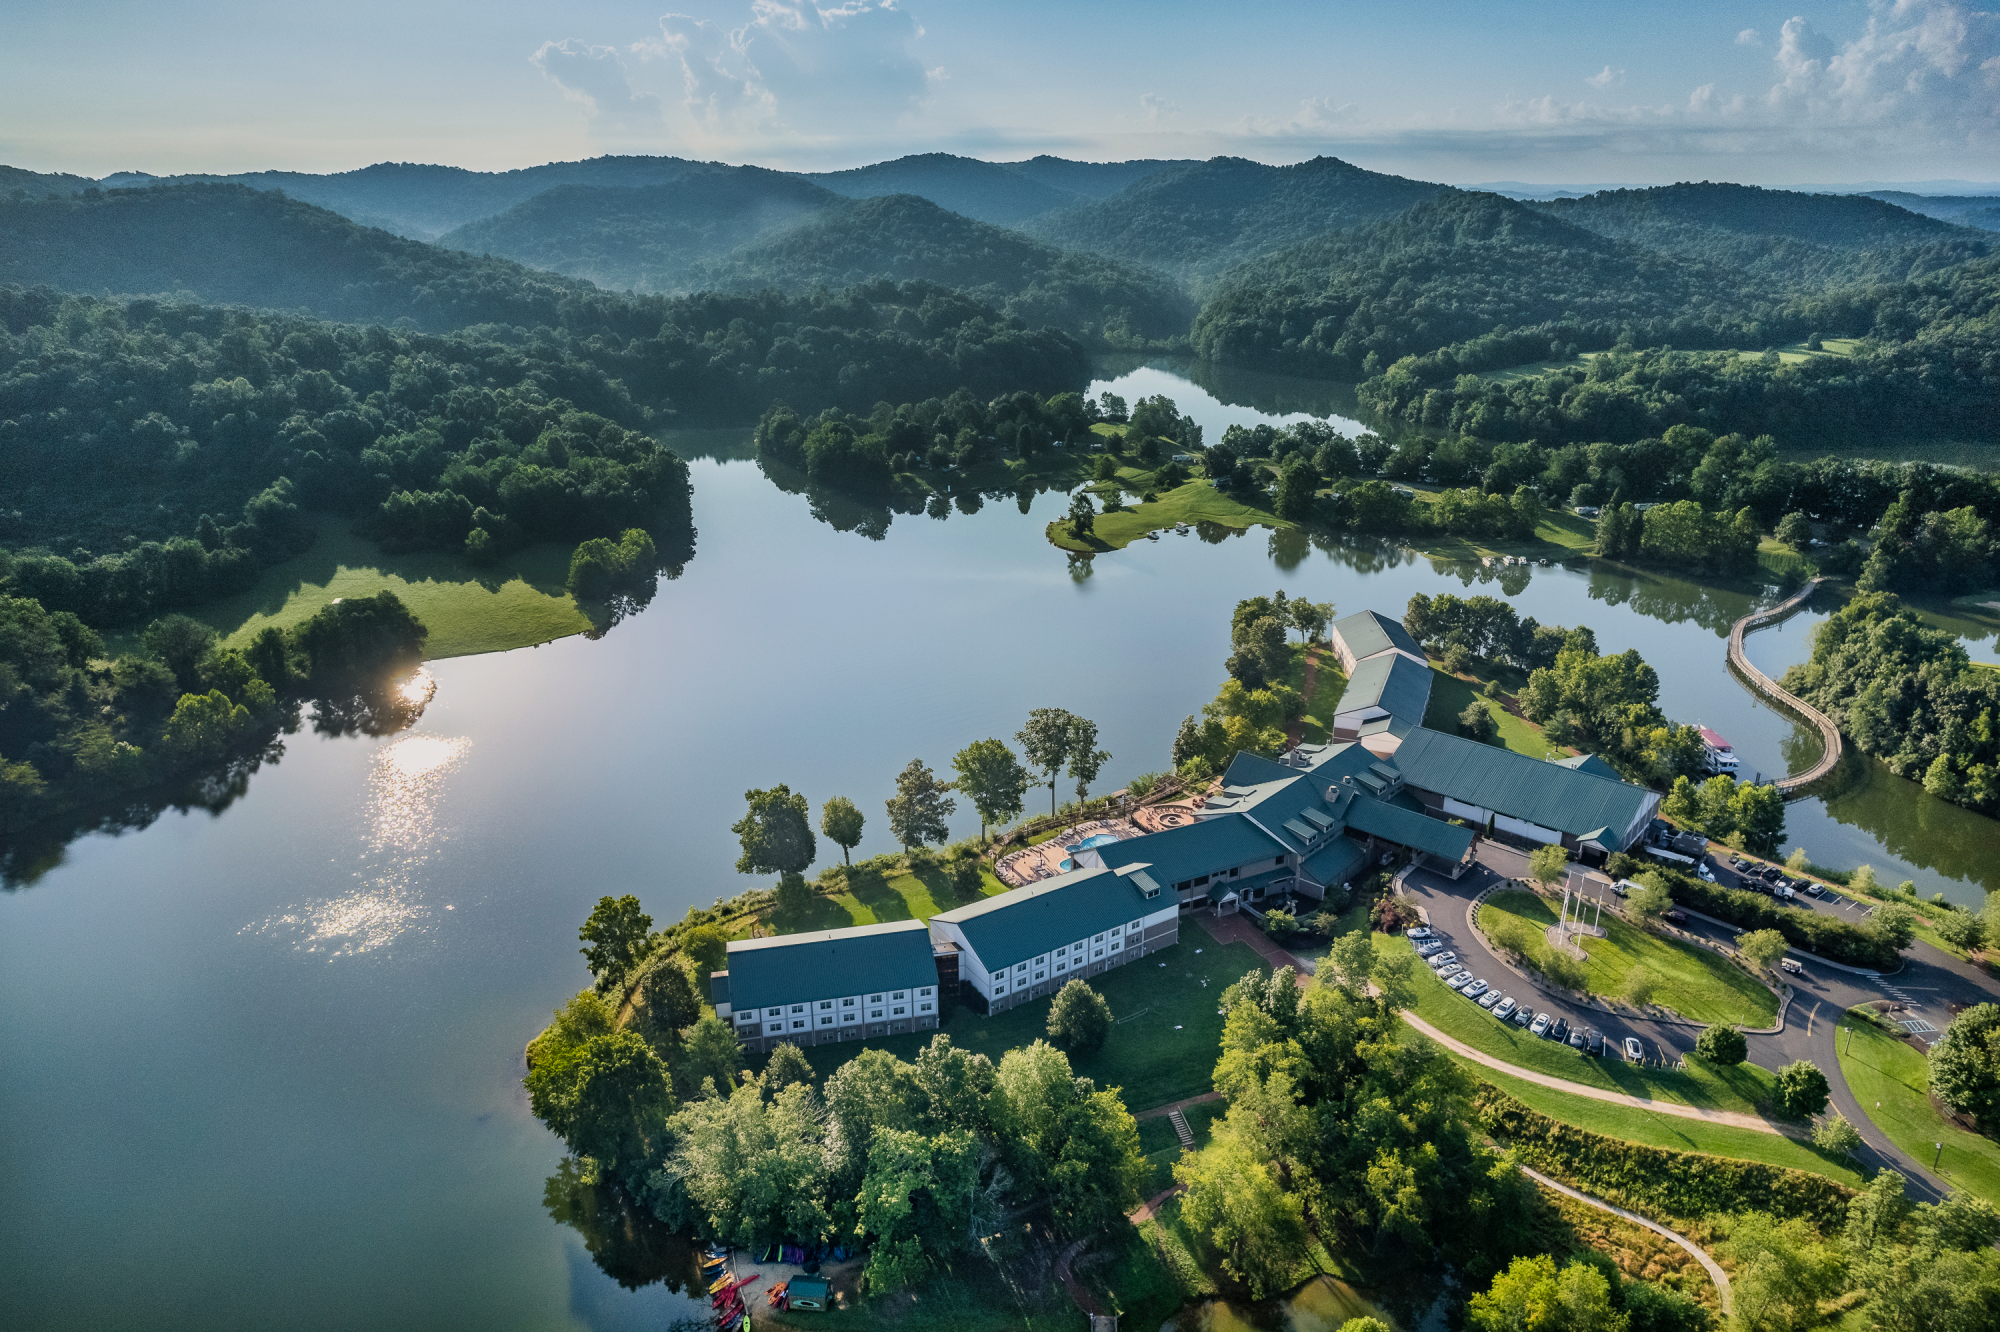 An aerial view of a serene lakeside resort surrounded by lush green hills and trees, with clear blue skies above and sunlight reflecting off the water.